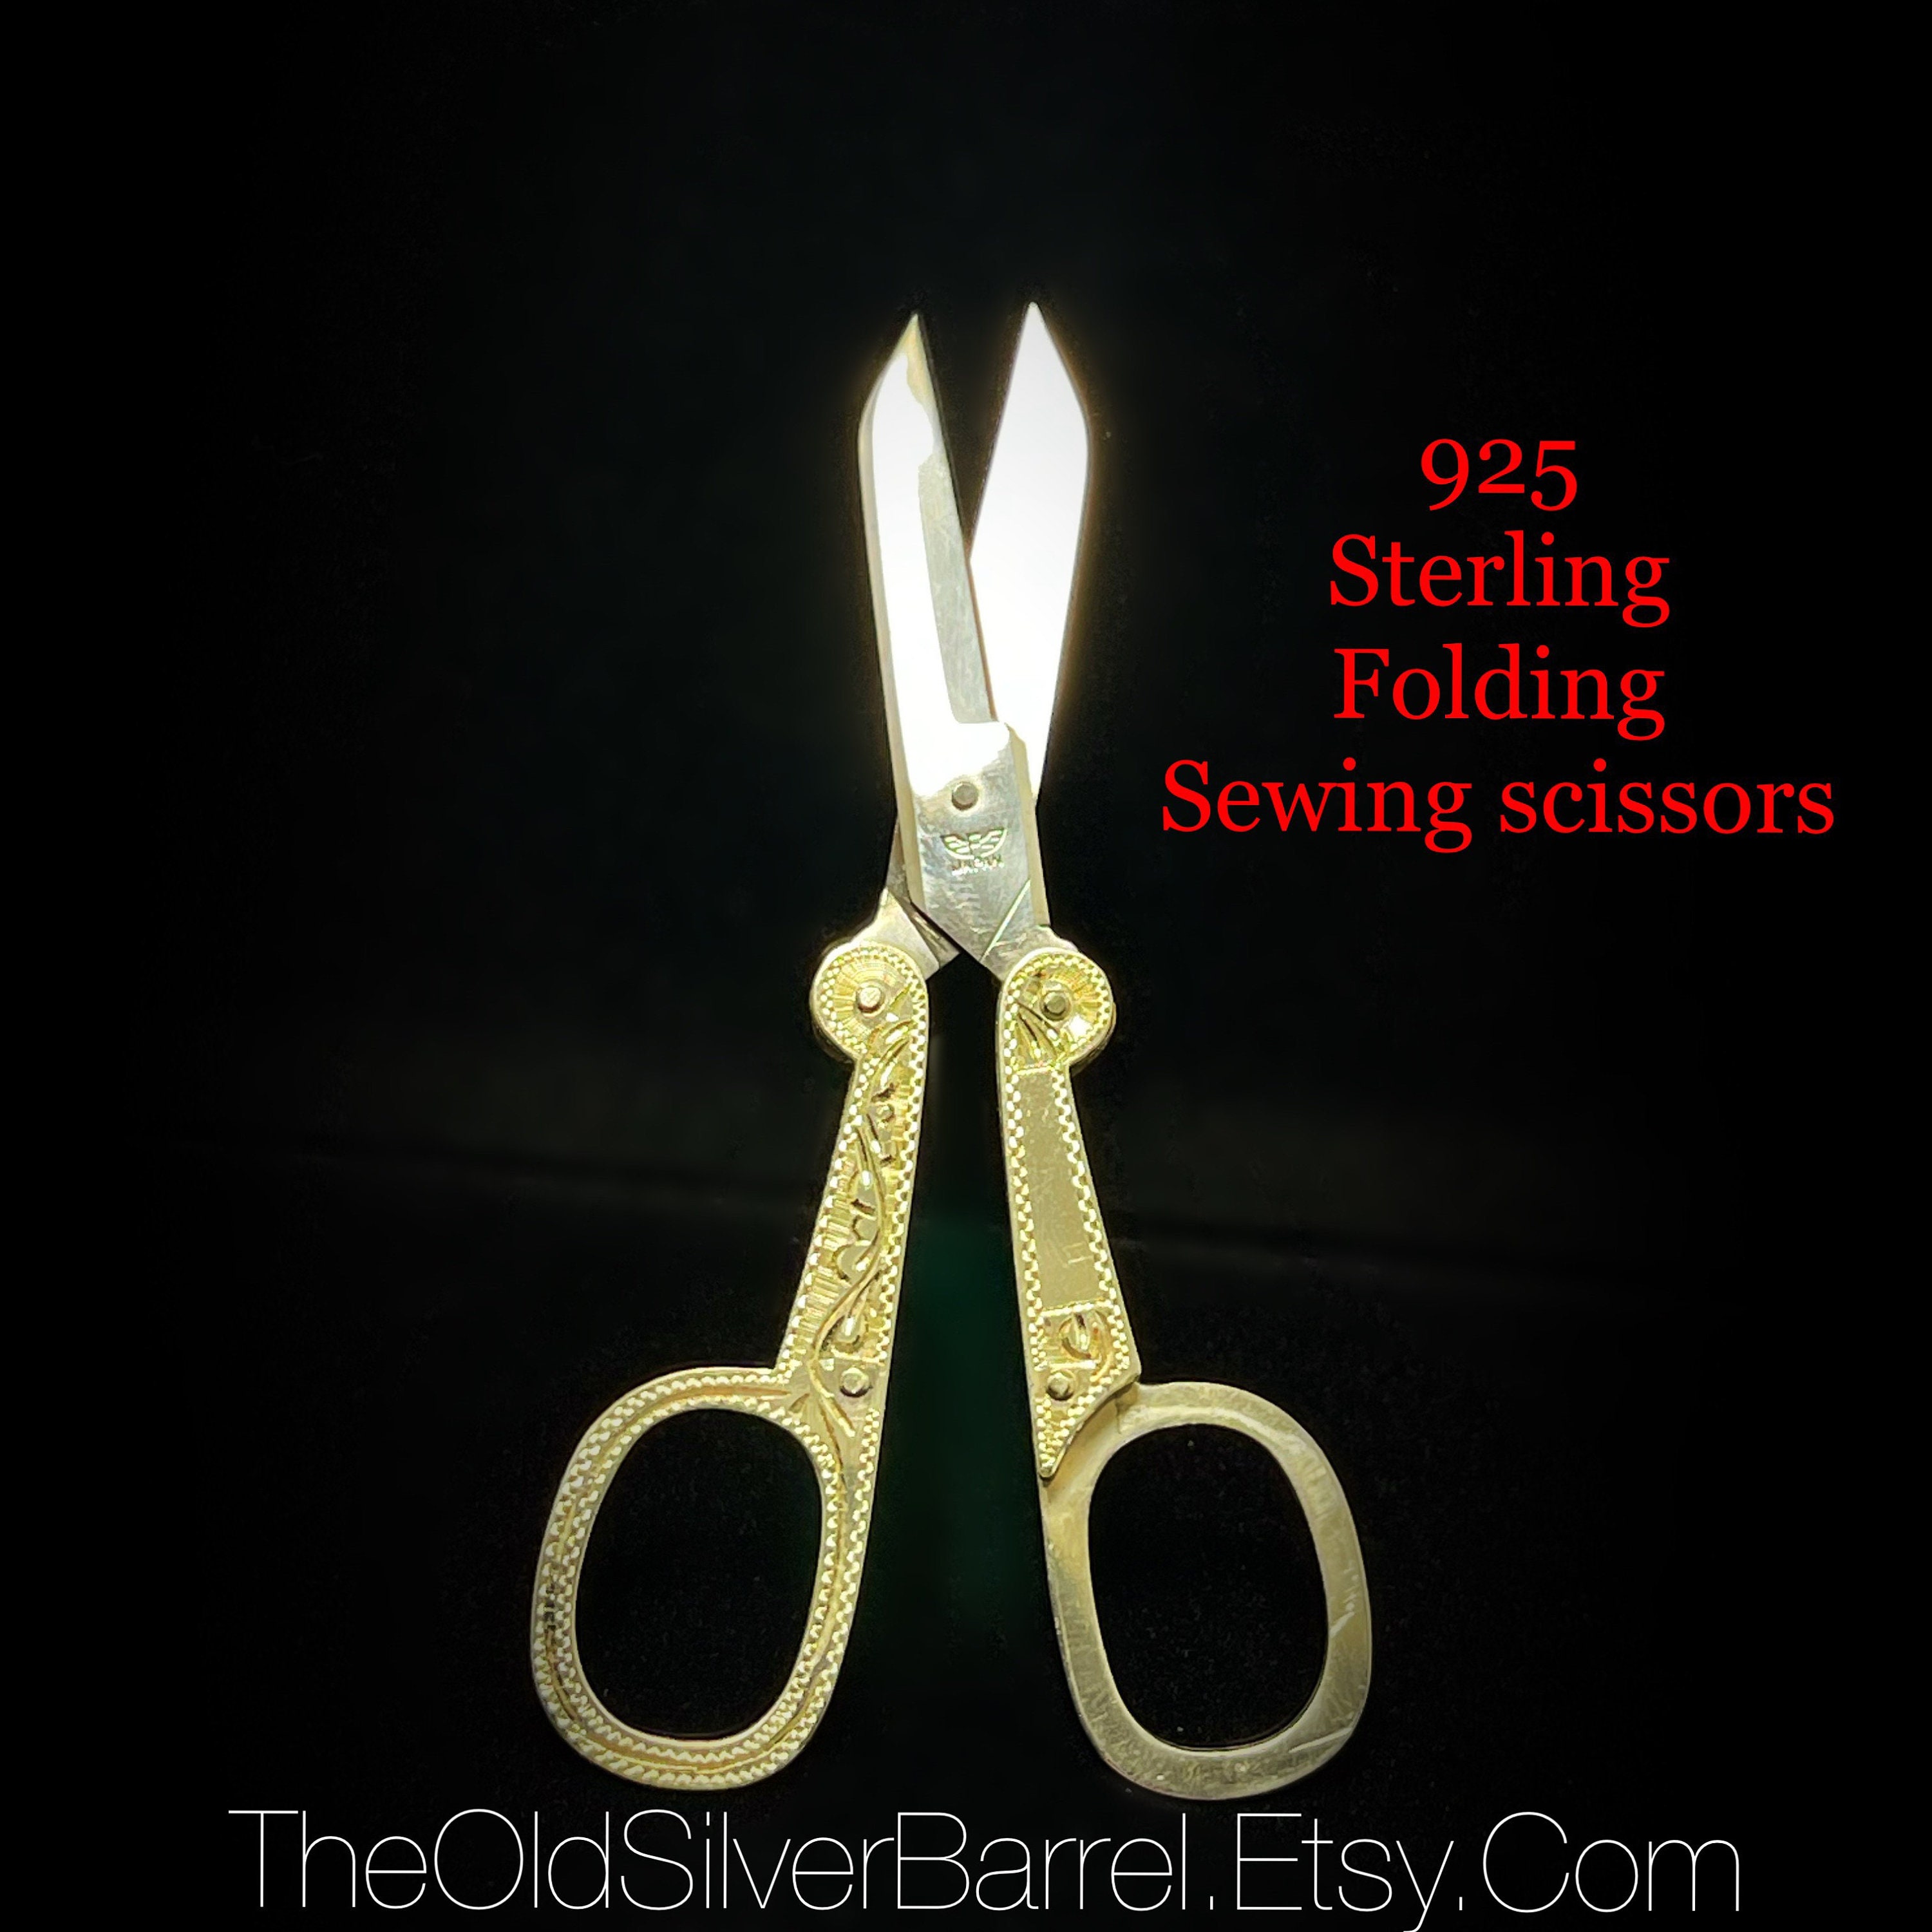 HALO FORGE Small Sharp Scissors: Straight Detail Embroidery Scissors  Stainless Steel Precise Pointed Tip for Cutting Fabric Thread Yarn Cross  Stitch